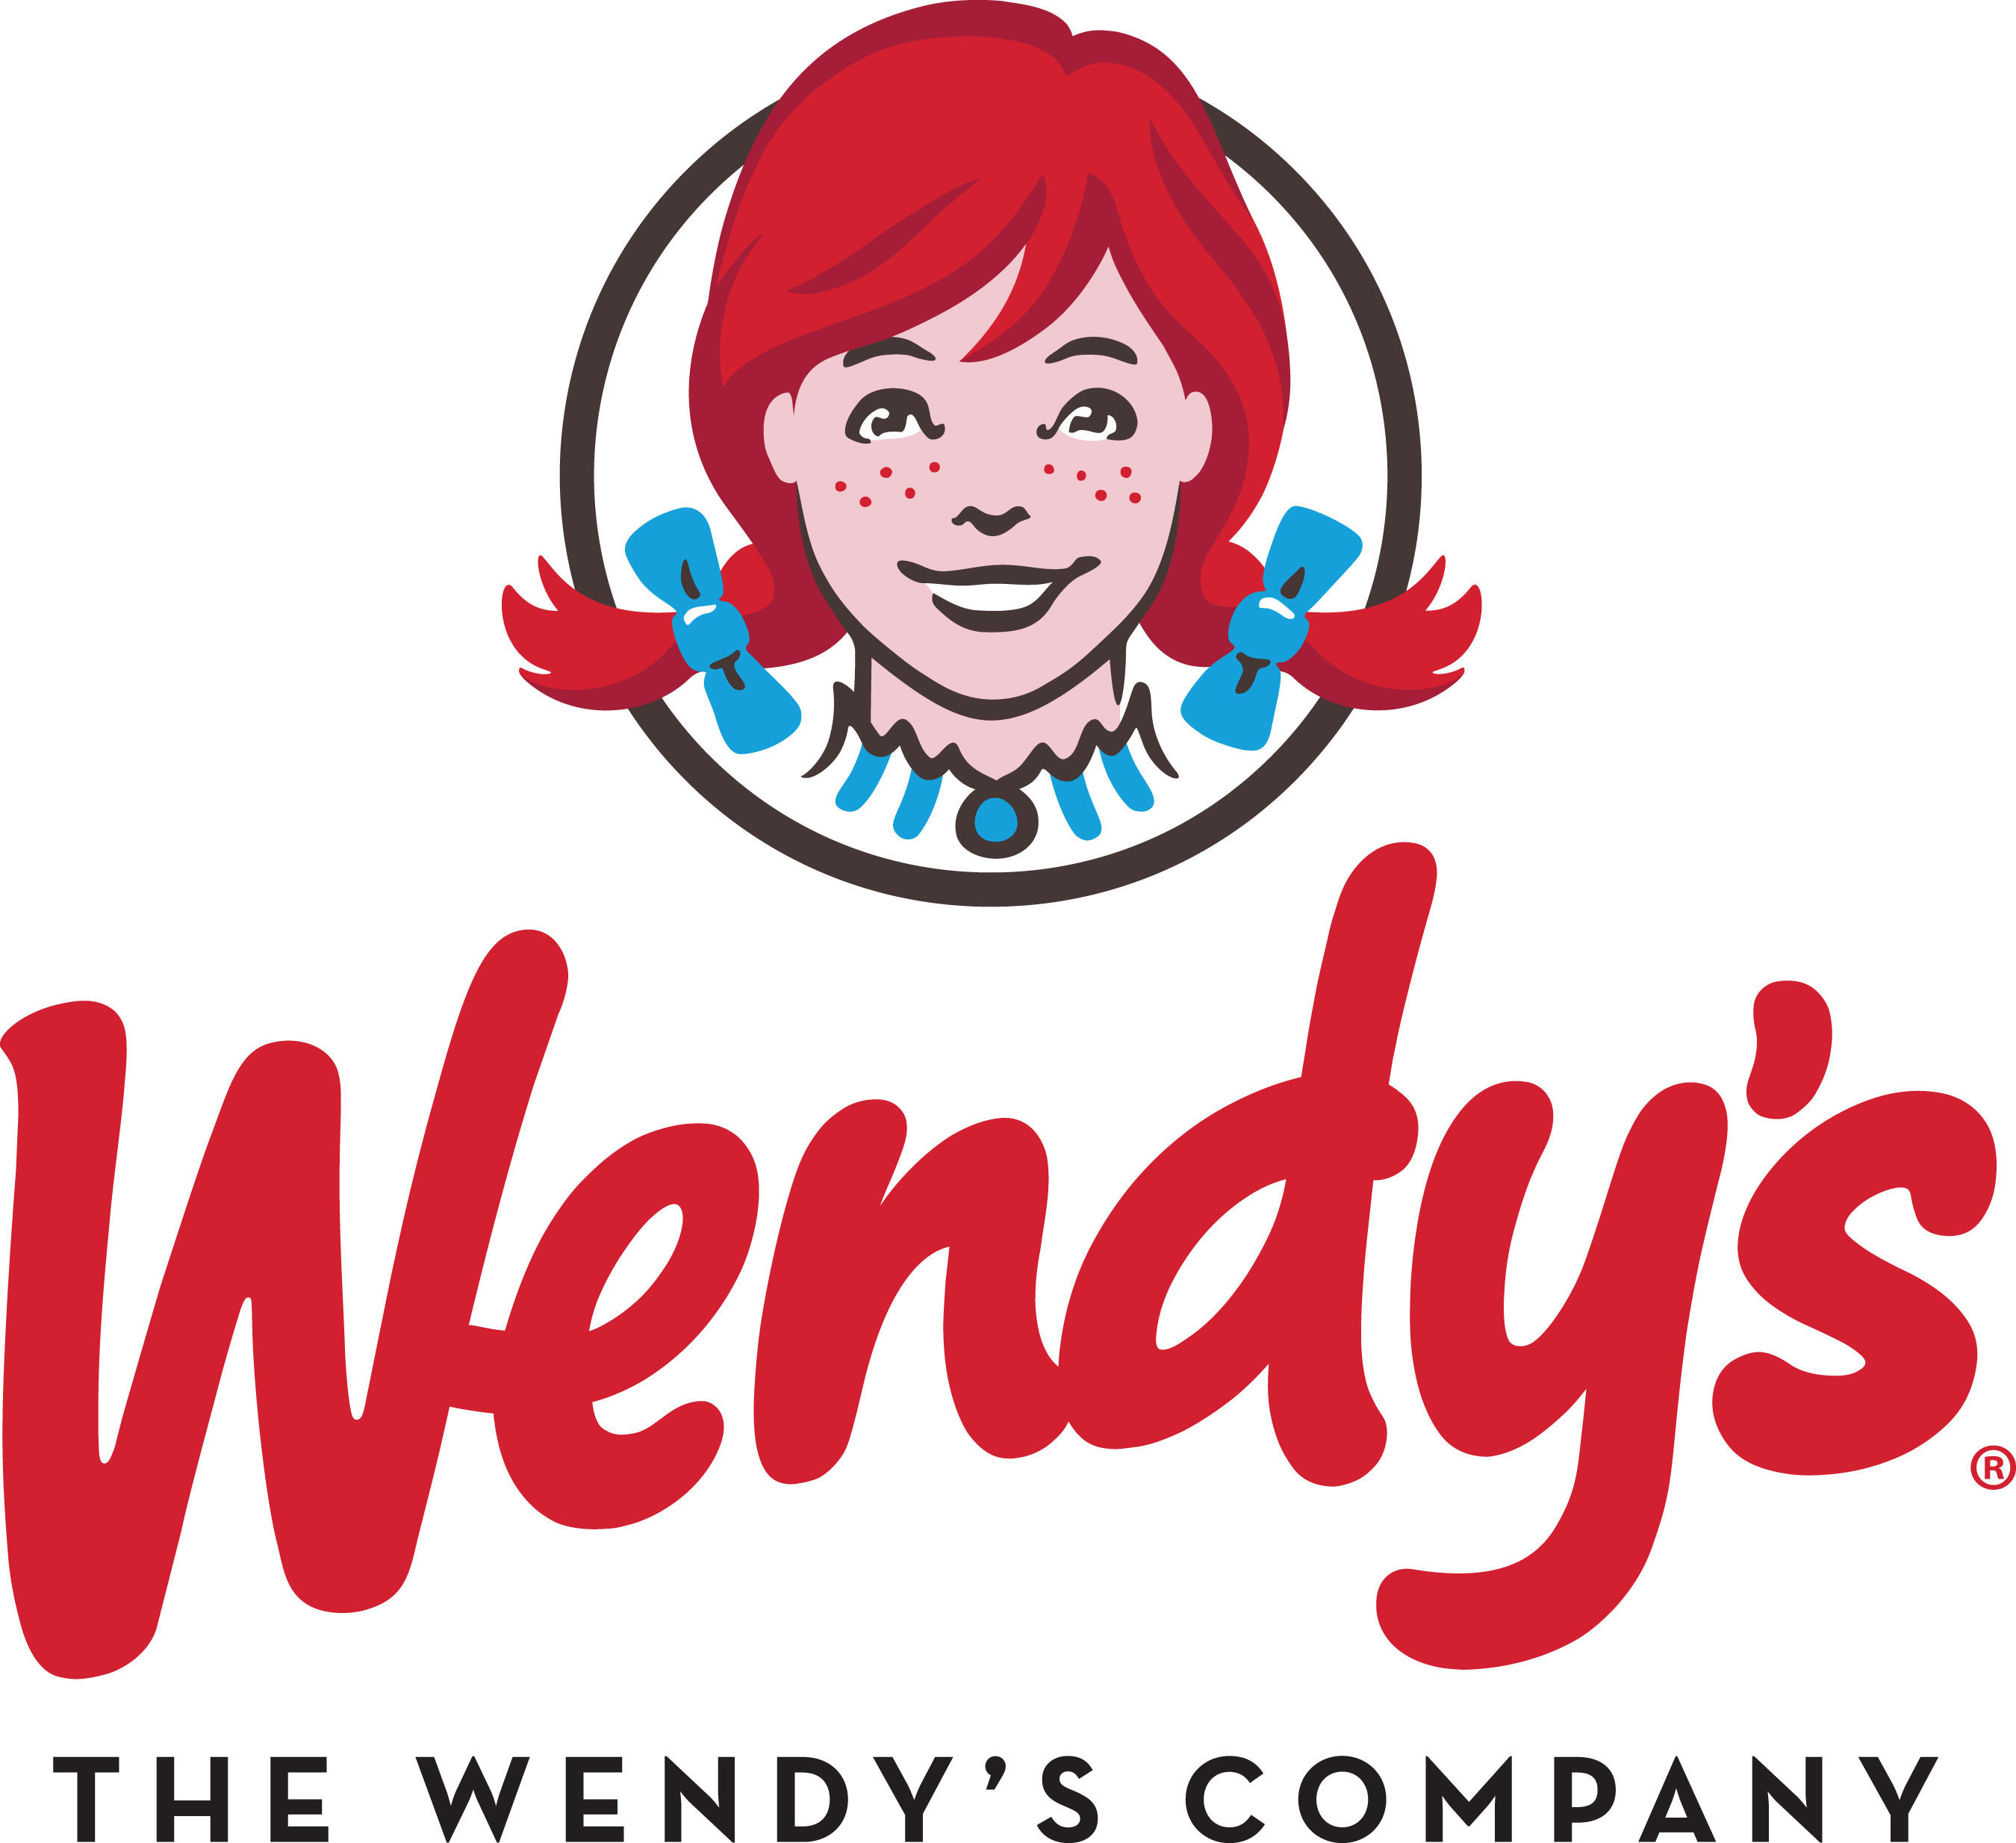 The Wendy’s Company is the world's third-largest quick-service hamburger company. The Wendy’s system includes approximately 6,500 franchise and Company-operated restaurants in the United States and 28 countries and U.S. territories worldwide. For more information, visit www.aboutwendys.com. (PRNewsFoto/The Wendy's Company)